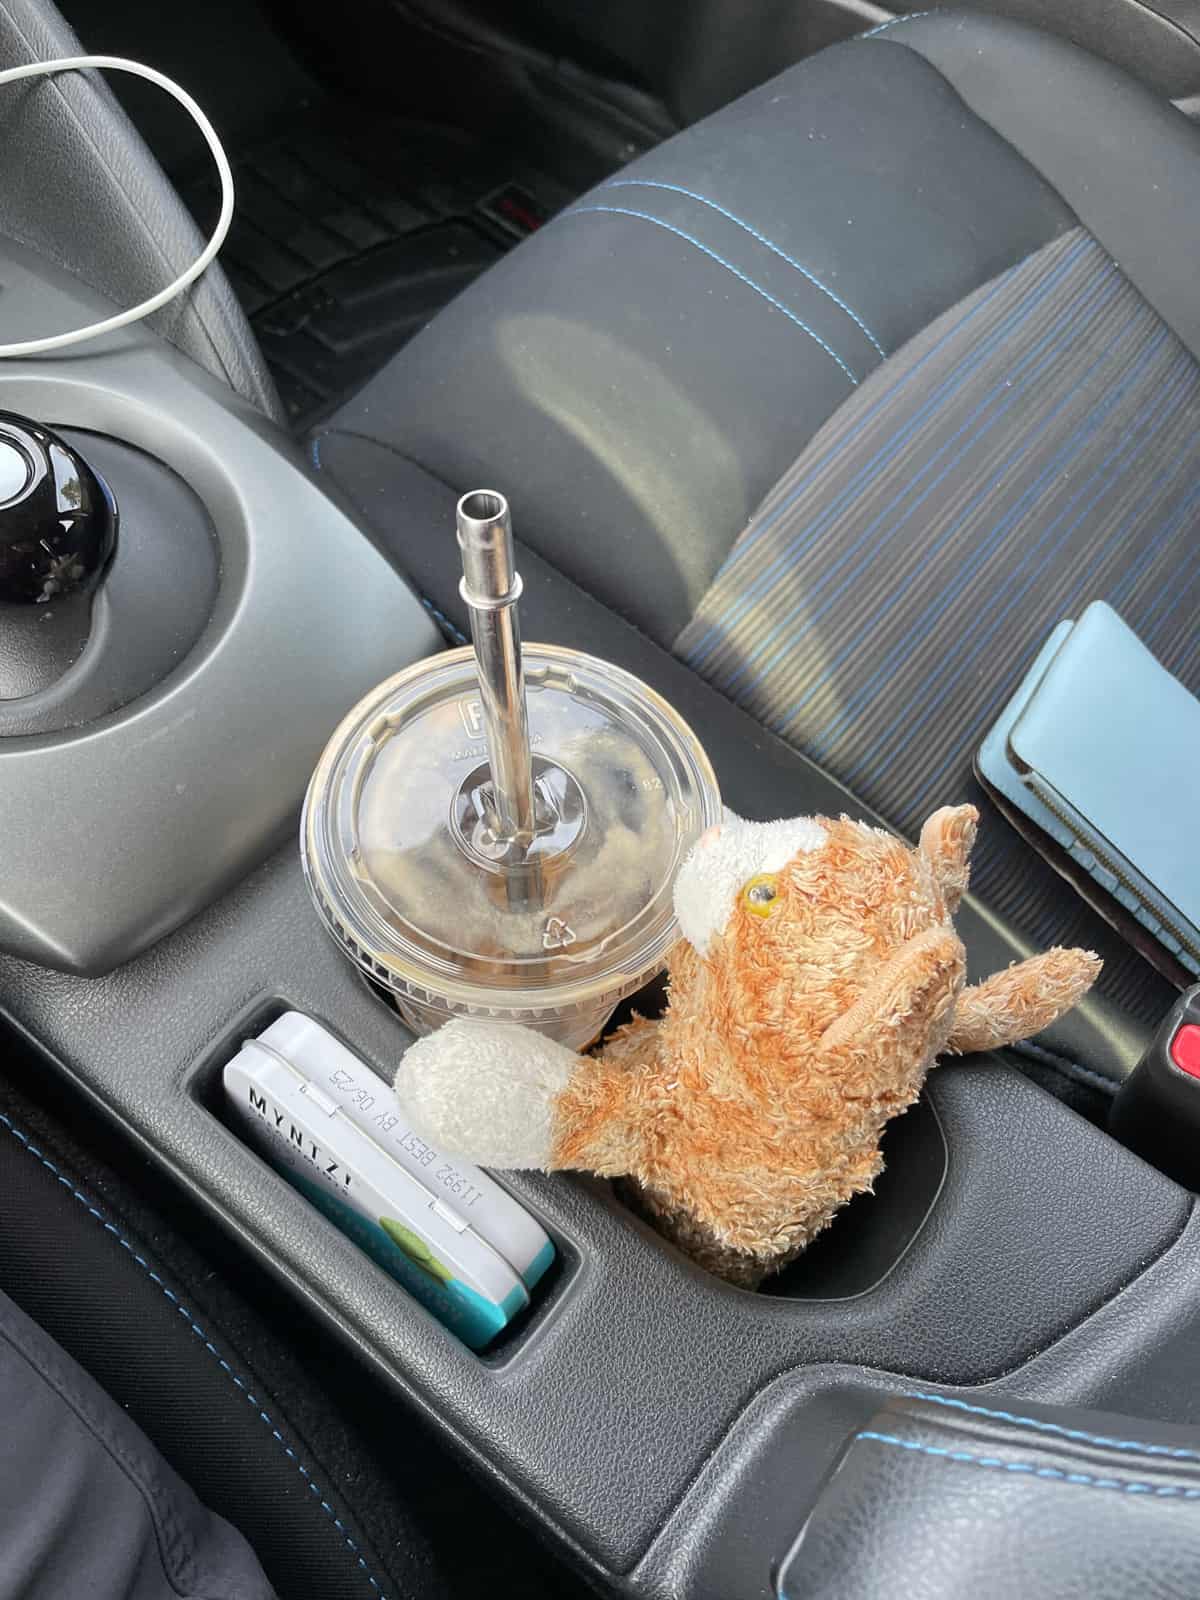 a stuffed cat with a latte in a car's cupholder.